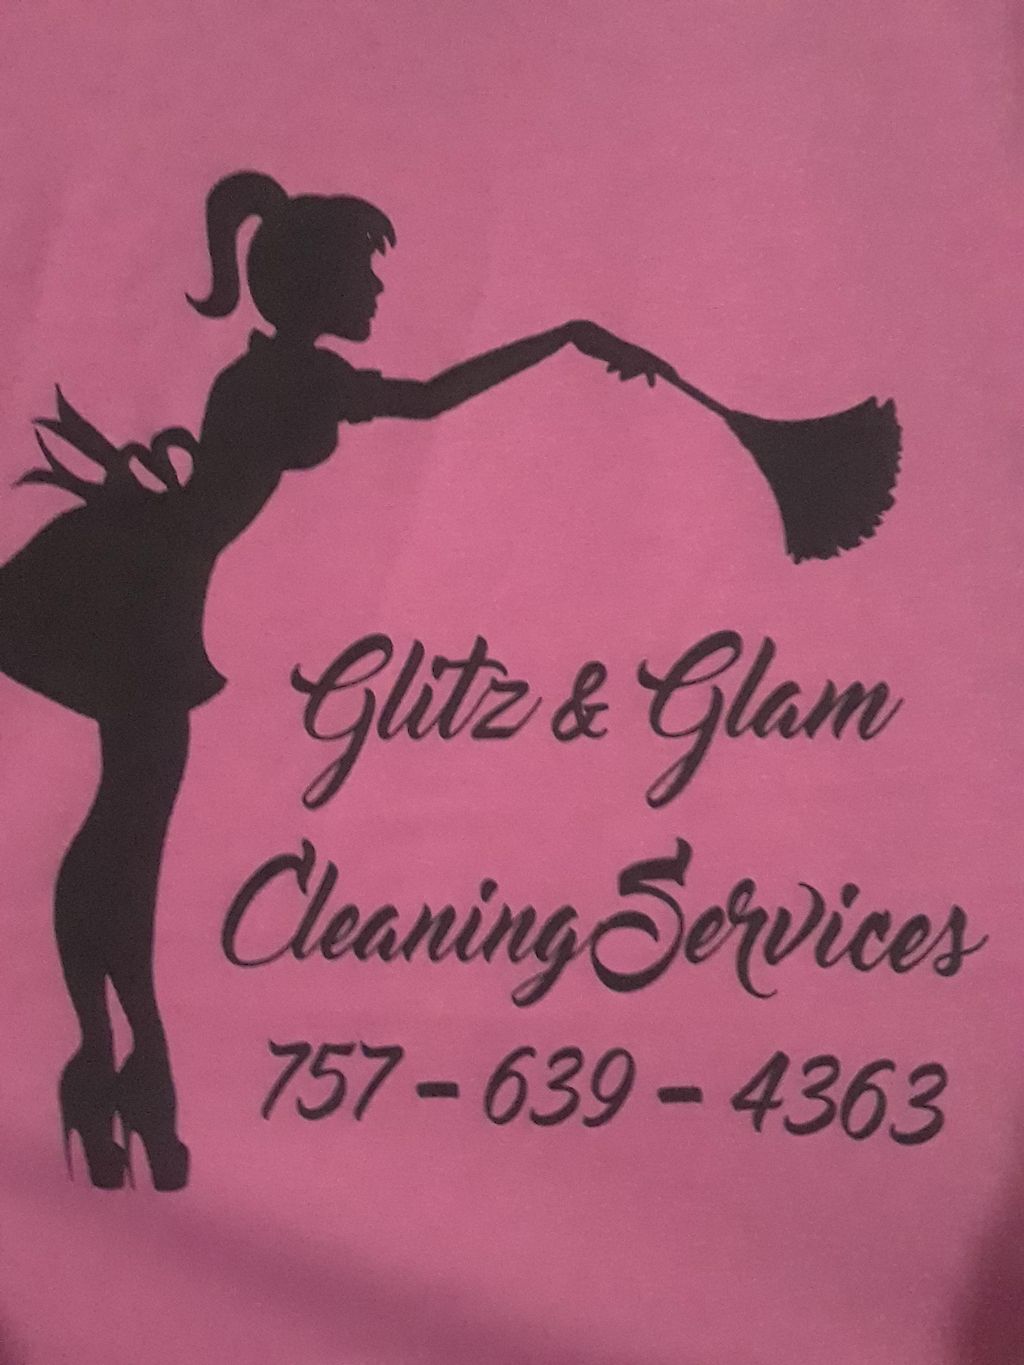 Glitz & Glam Cleaning Services